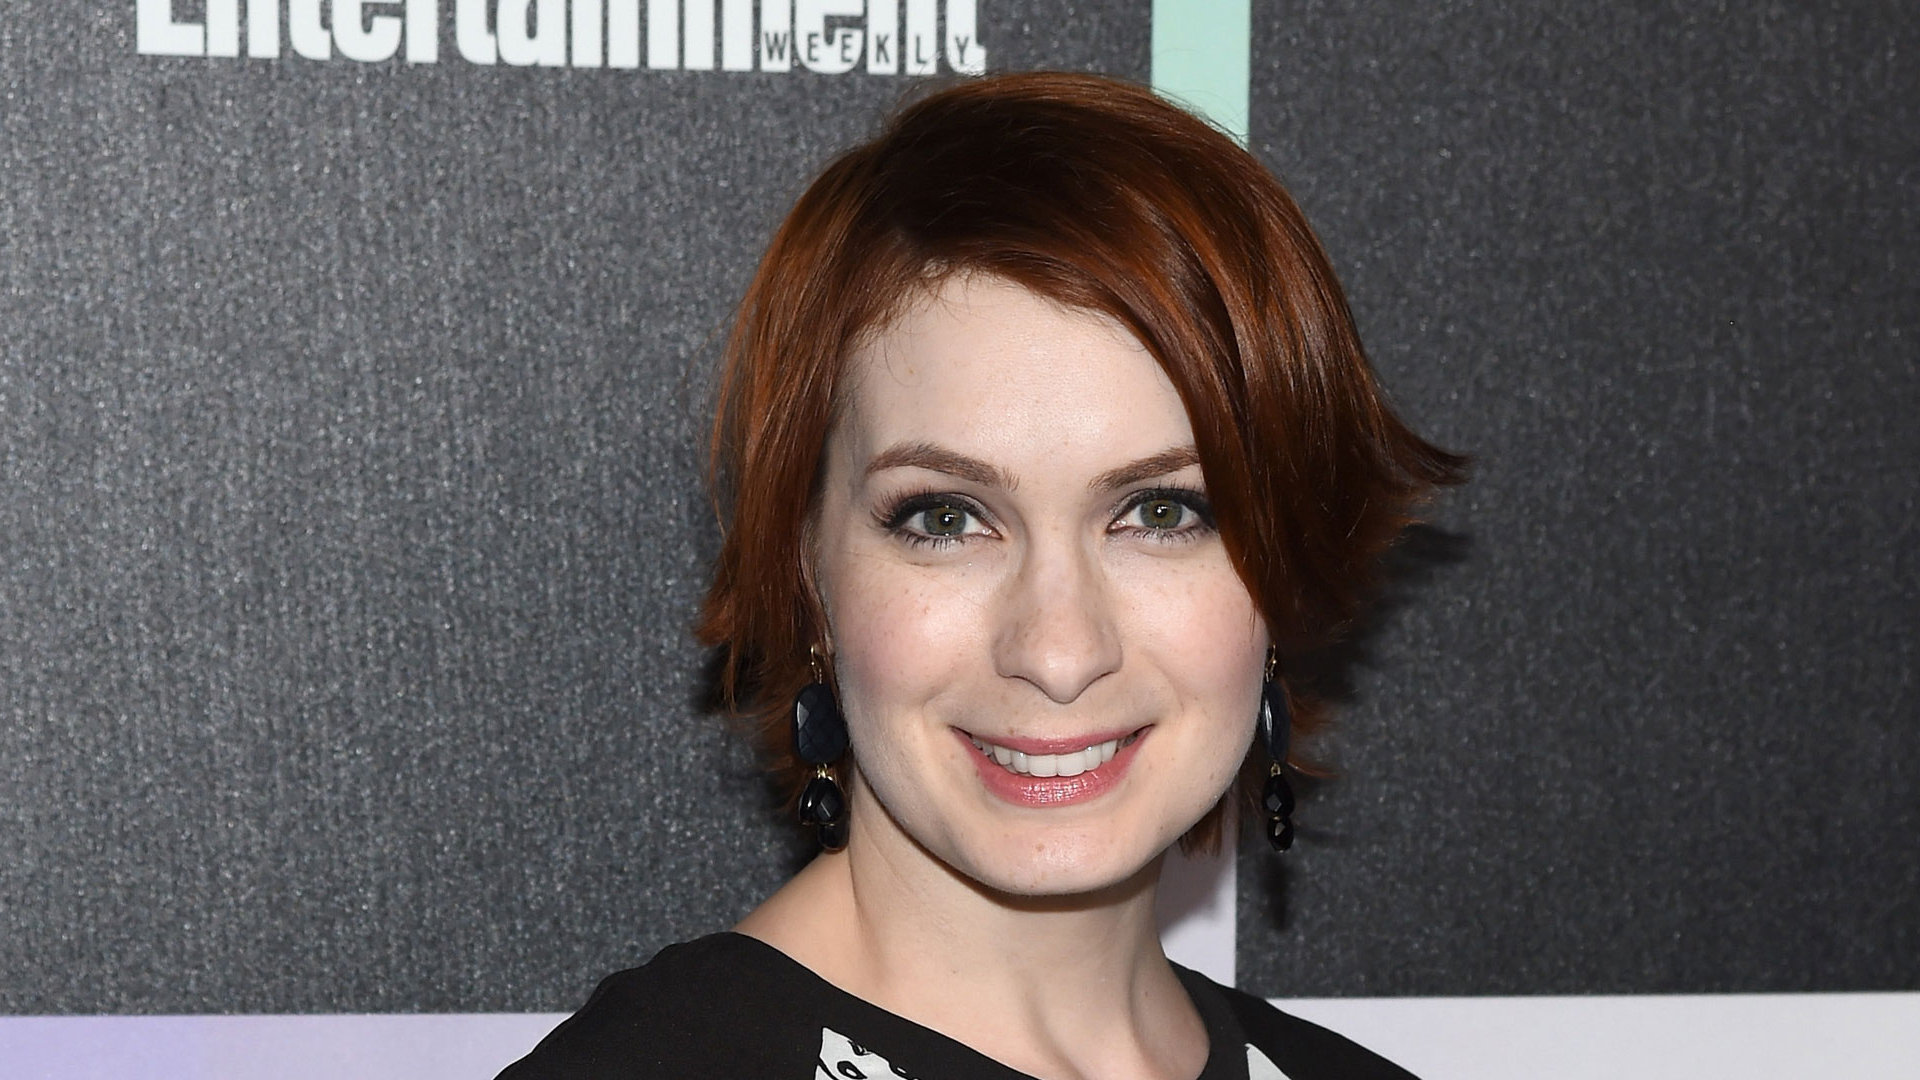 Download hd 1920x1080 Felicia Day PC wallpaper ID:86359 for free